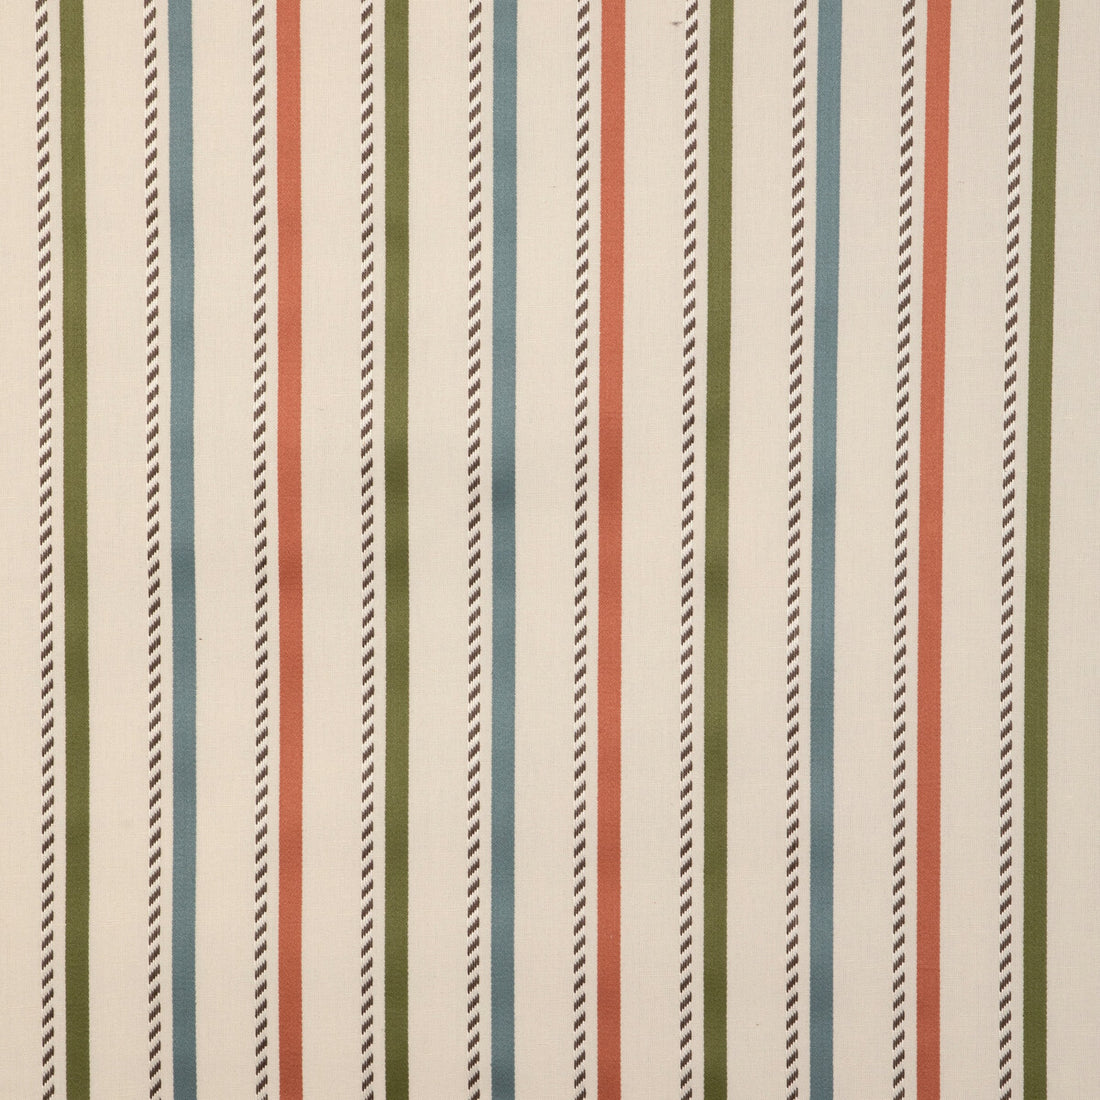 Buxton Stripe fabric in leaf/clay color - pattern 2023106.324.0 - by Lee Jofa in the Highfield Stripes And Plaids collection